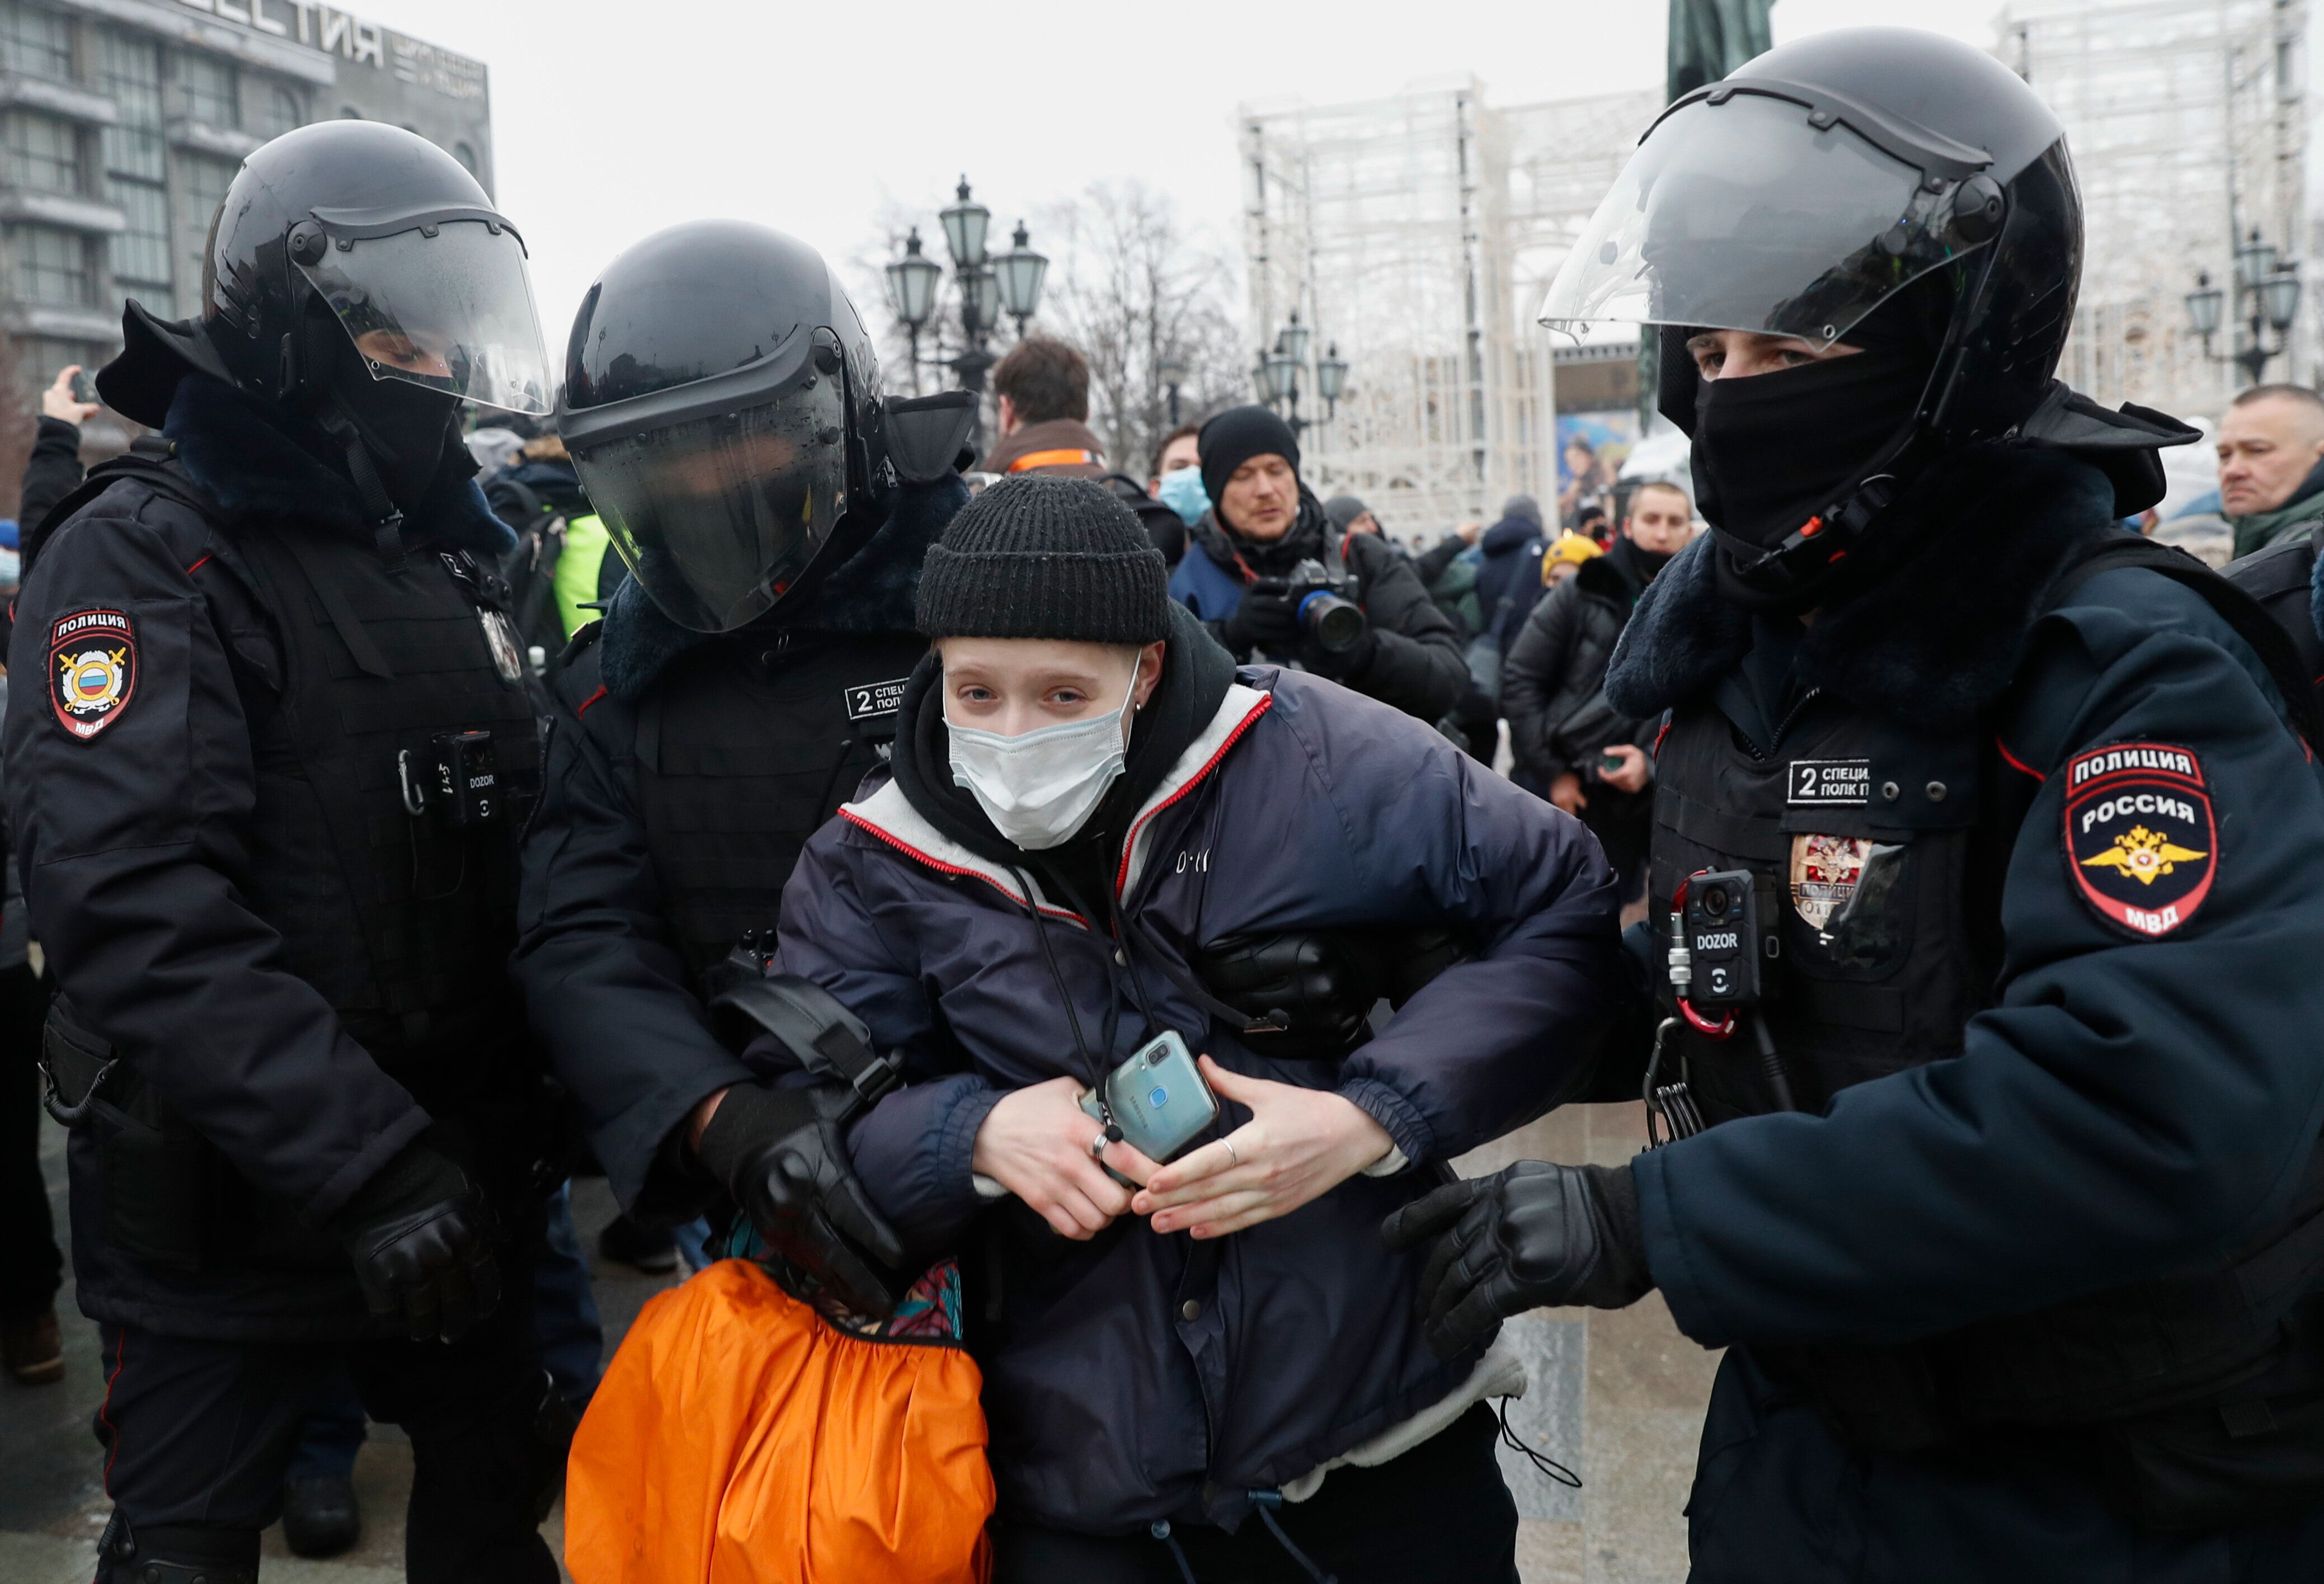 Police are detaining people at rallies across Russia who are protesting in support of Kremlin critic Alexei Navalny, the OVD-